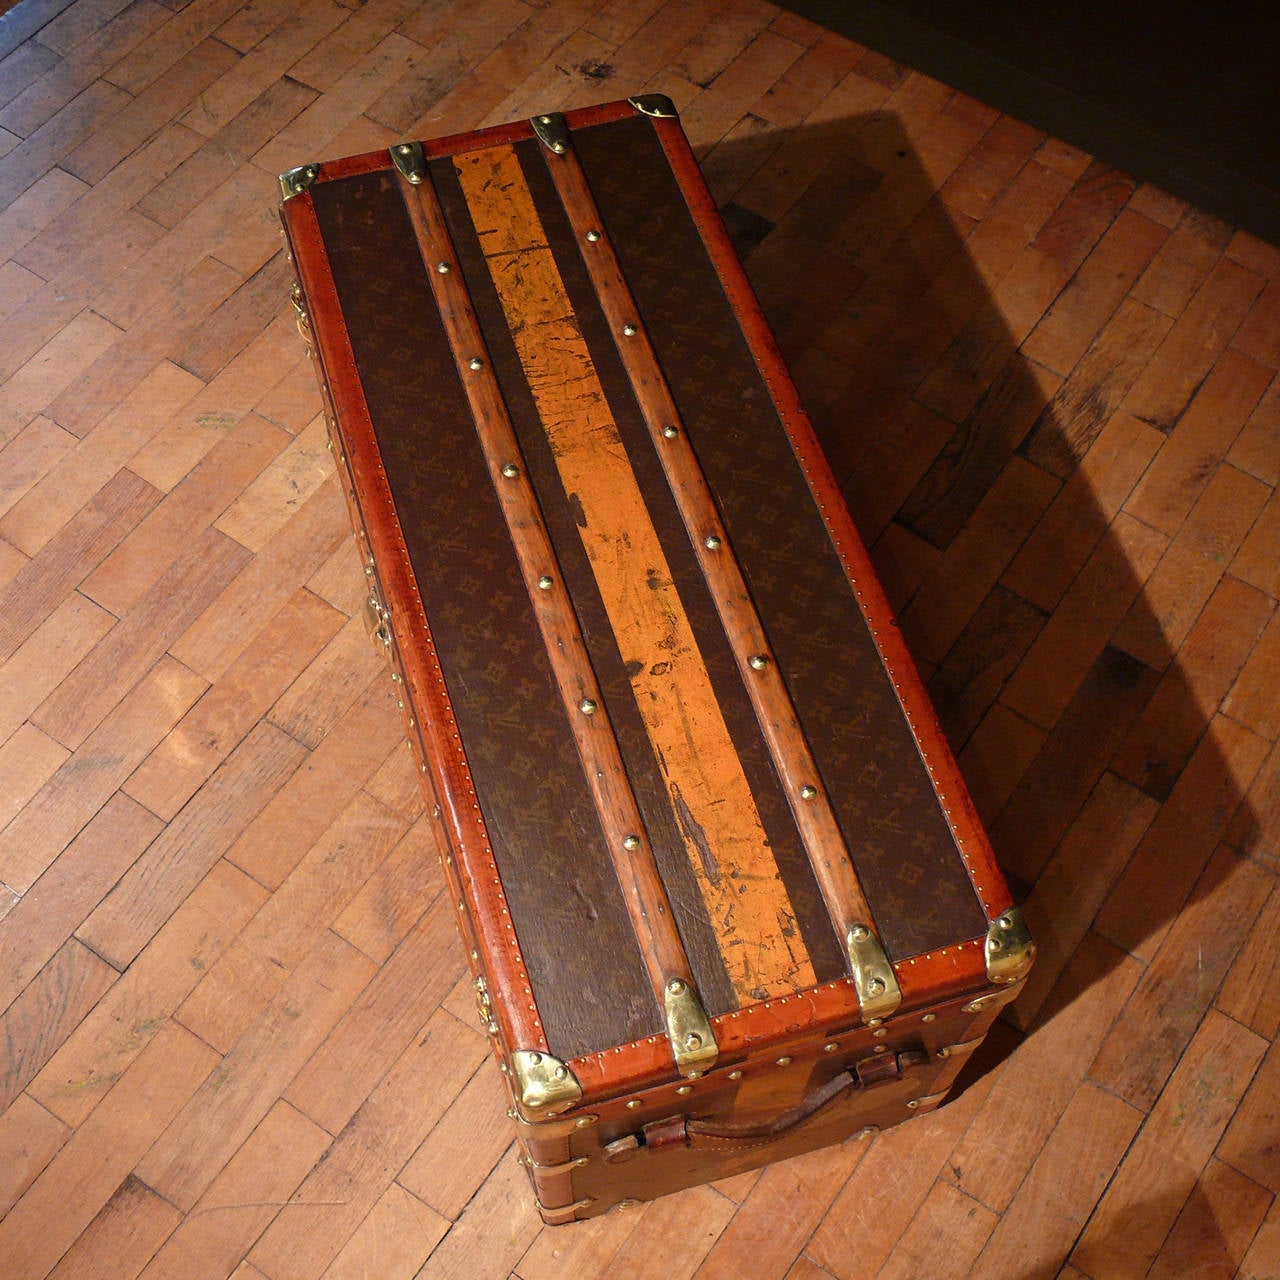 Delightful Louis Vuitton Shoe Trunk with Striped Livery, circa 1935 5